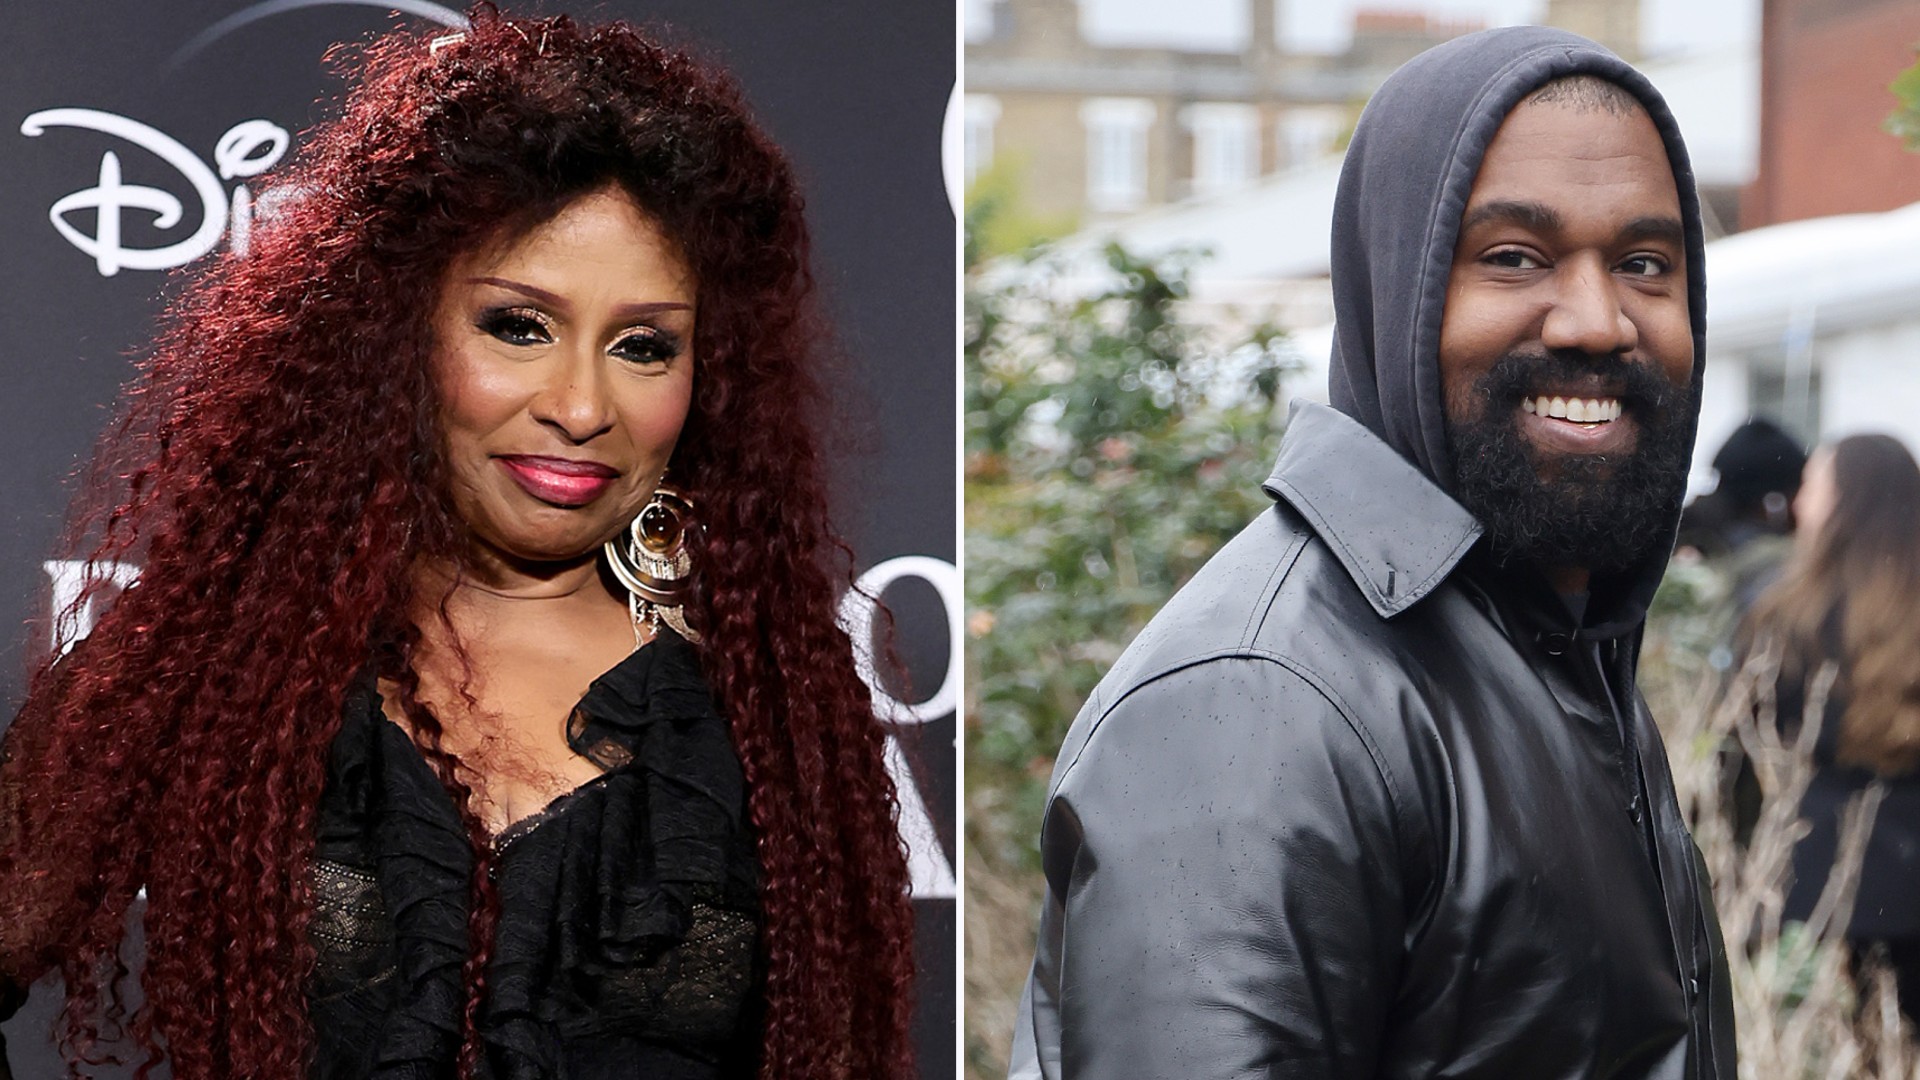 Chaka Khan Says She's Ended Her Years-Long Grudge Against Kanye West For Sampling Her Song